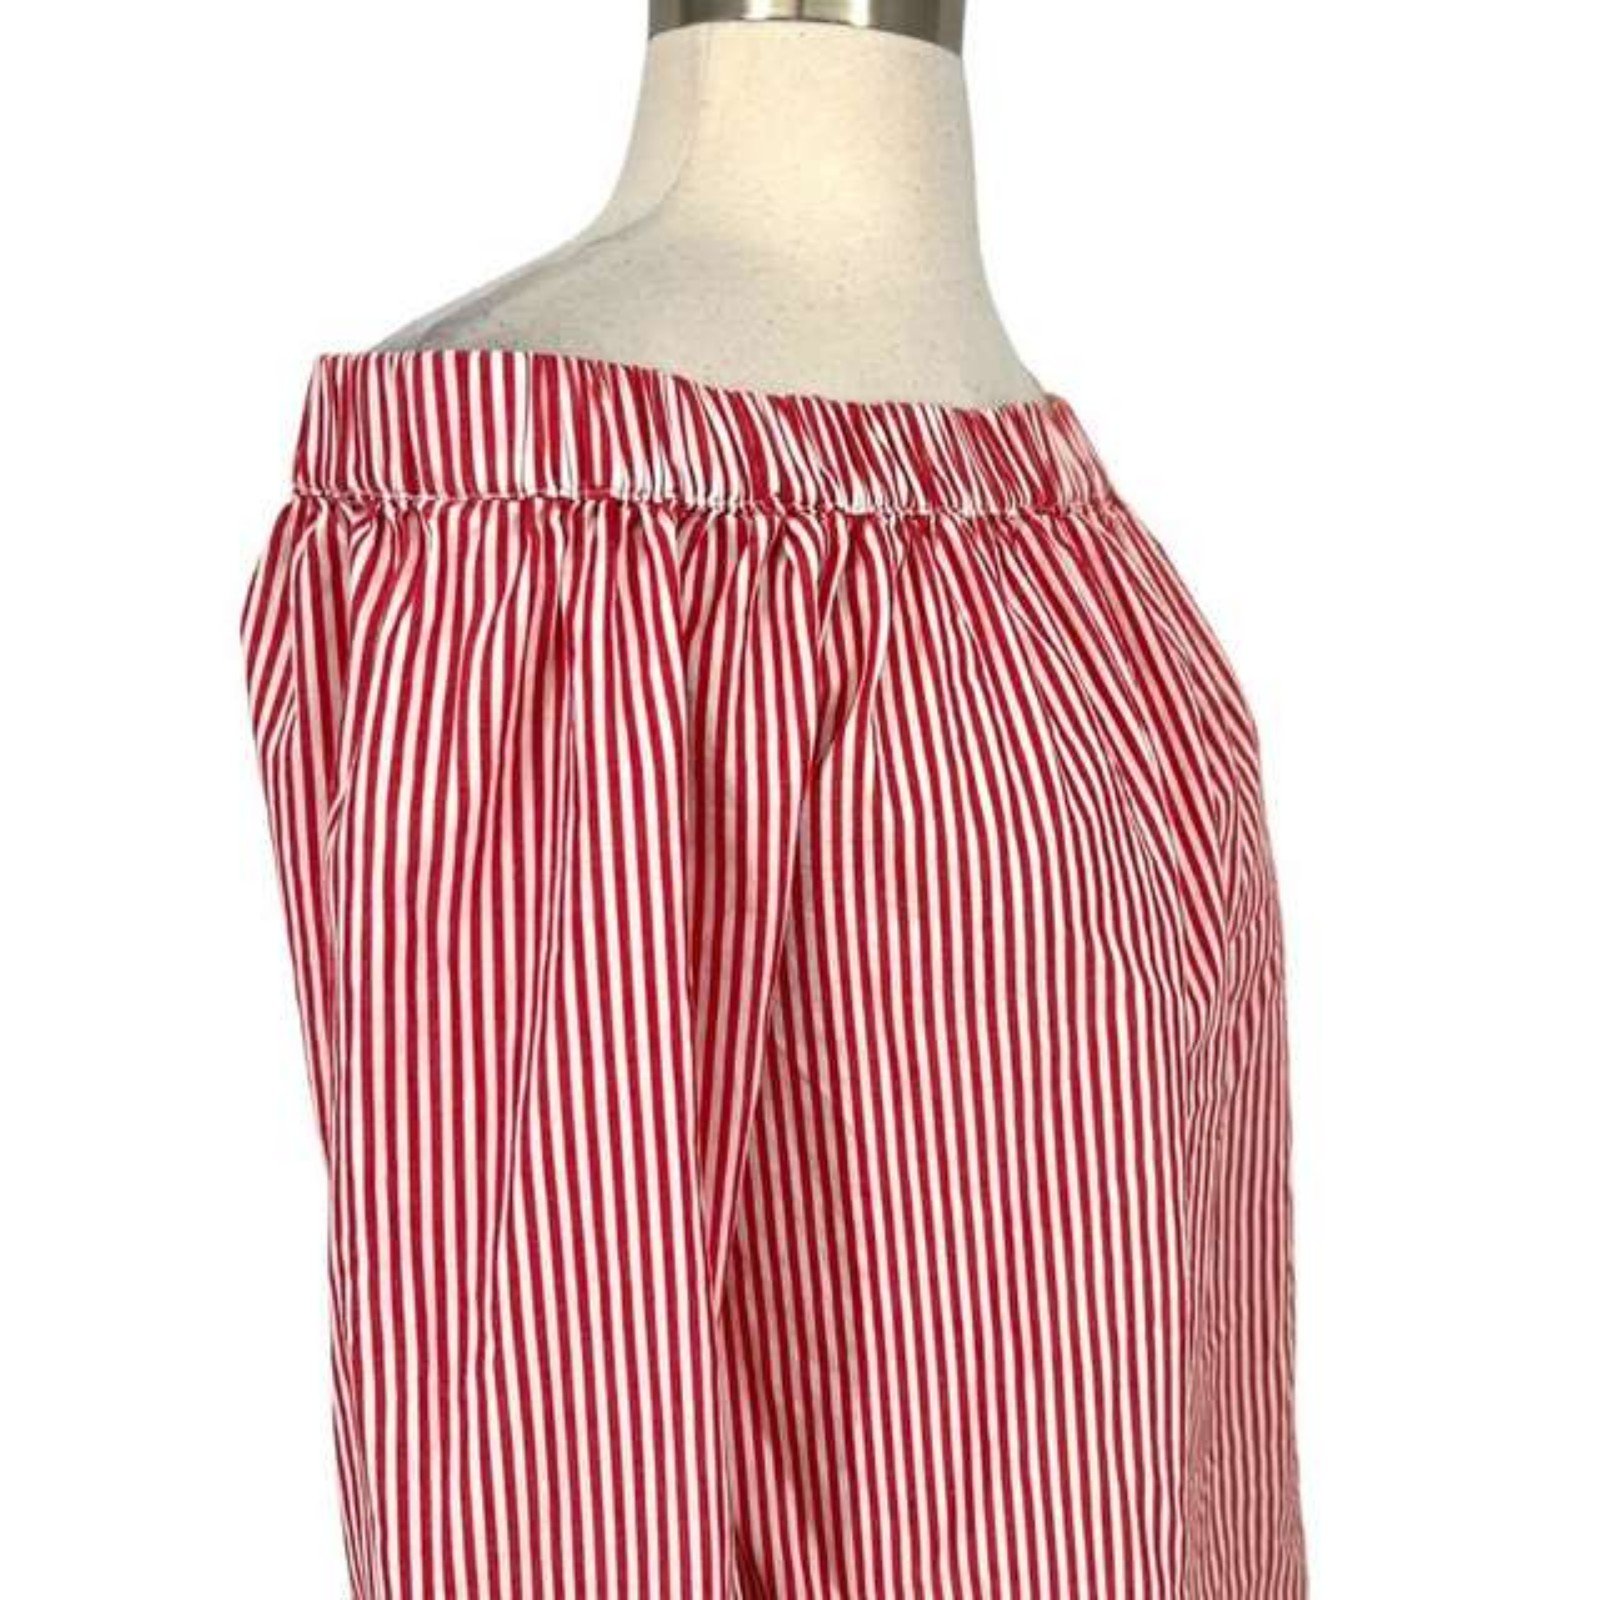 Wholesale price Beach Lunch Lounge Red white Boho Striped Off Shoulder Top Bell Sleeves Sz S n1CXtRL5N Discount